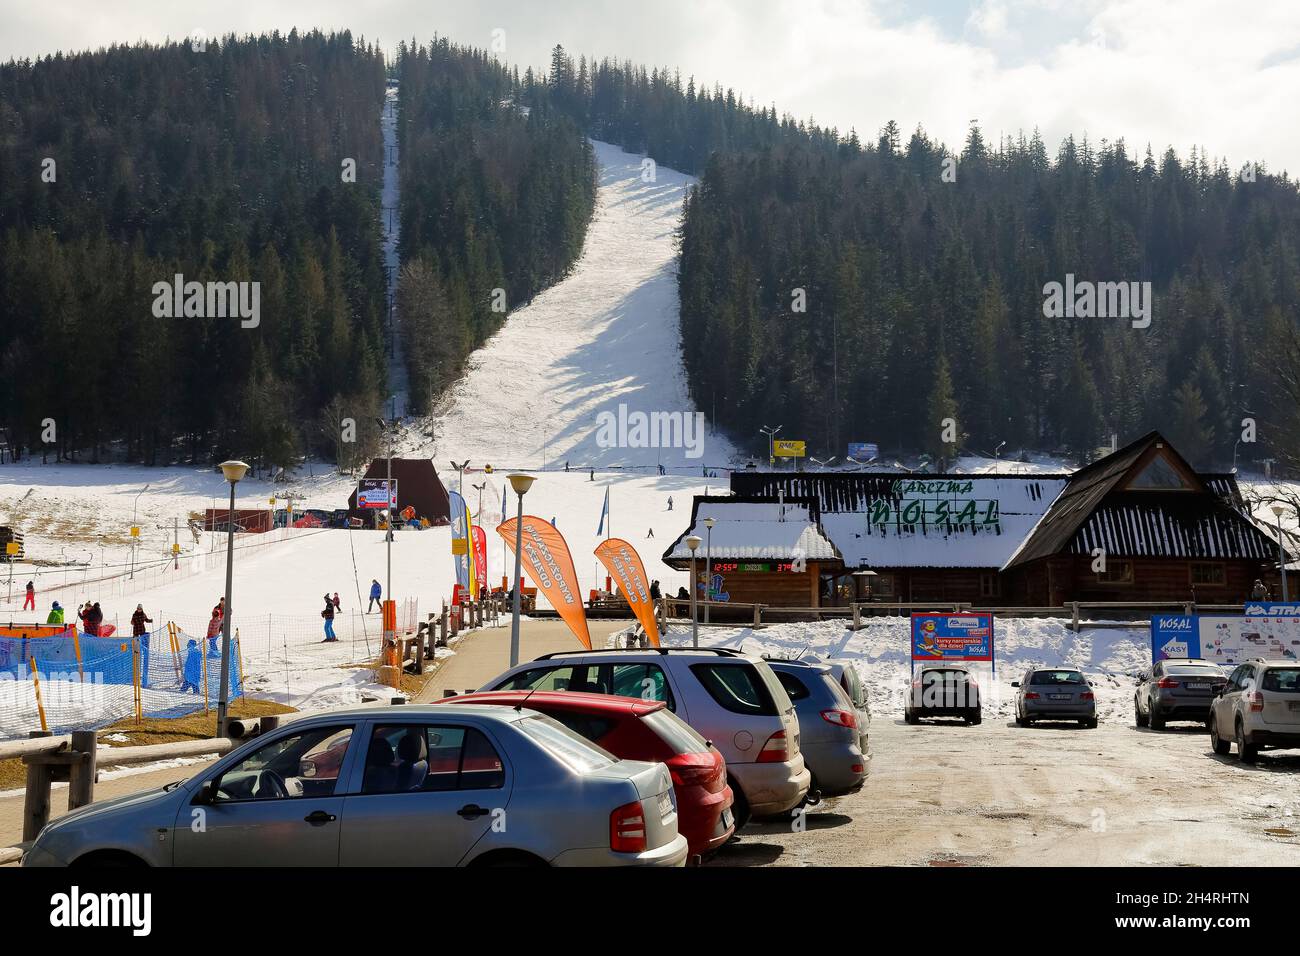 Zakopane, Poland - March 24, 2018: On the slope of the hill of the local name Nosal, among the forest areas there is a snowy ski slope. There is also Stock Photo